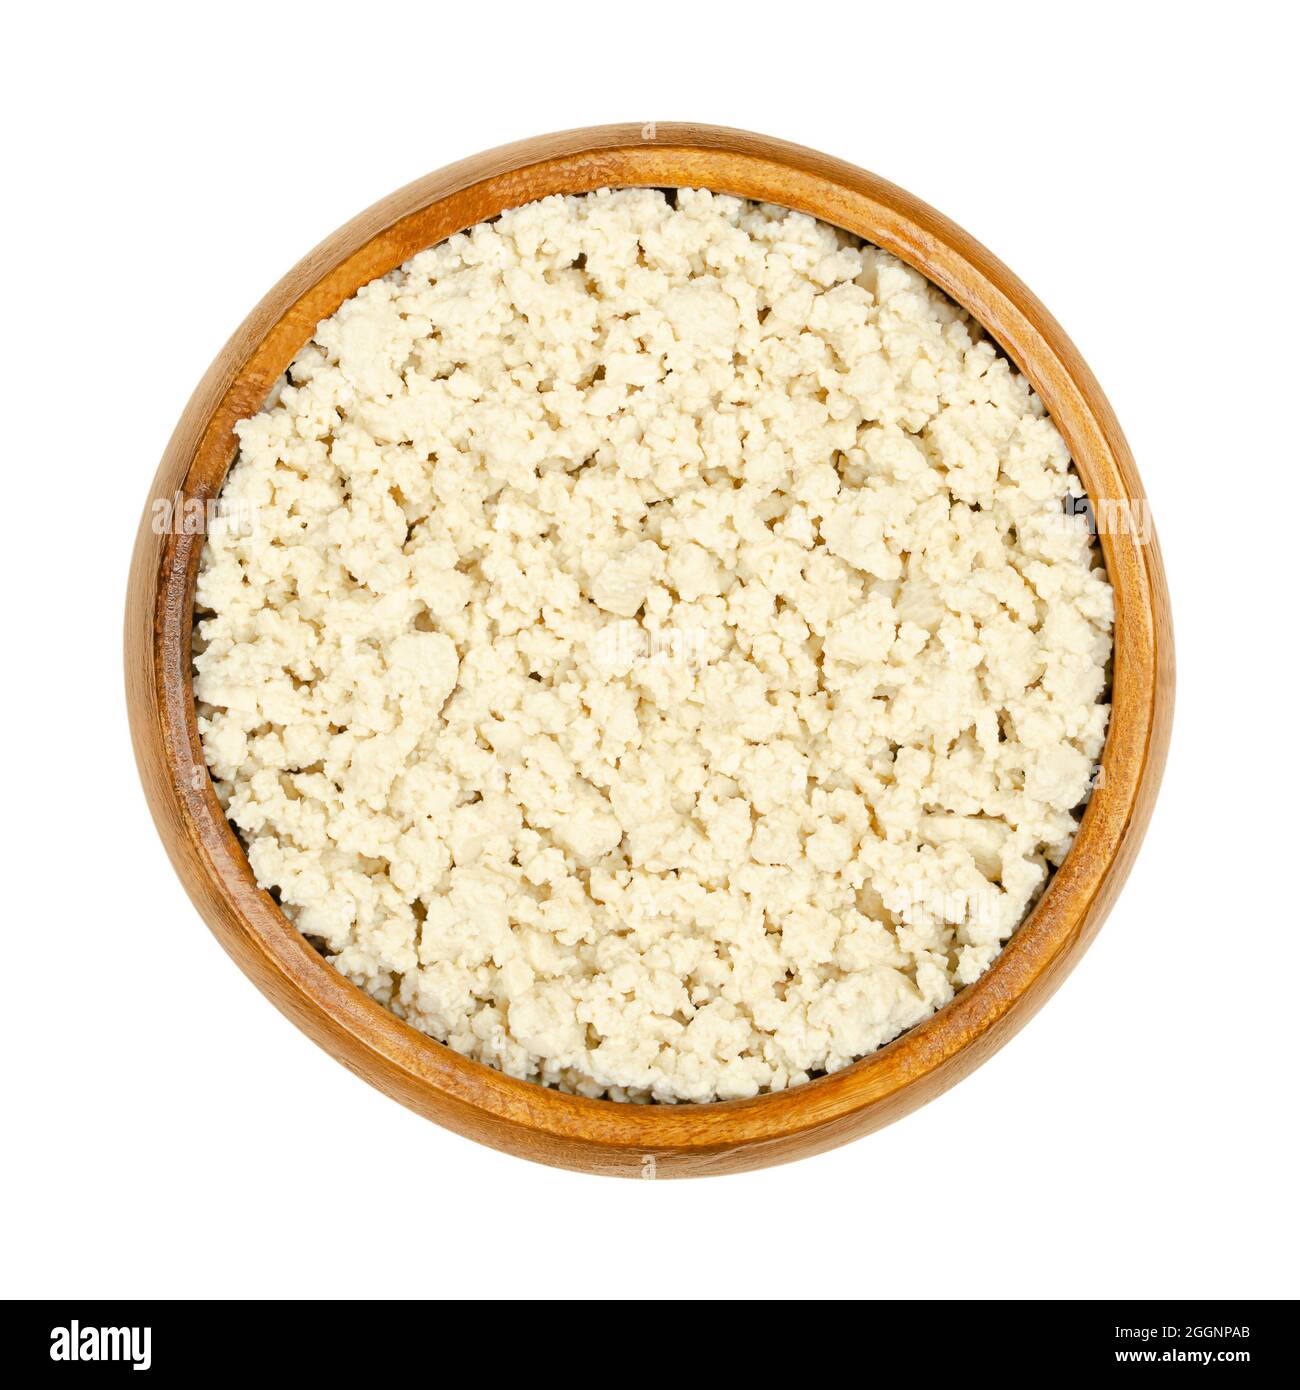 Crumbled white tofu, in a wooden bowl. Mashed bean curd, coagulated soy milk, pressed into white blocks of different softness. Stock Photo